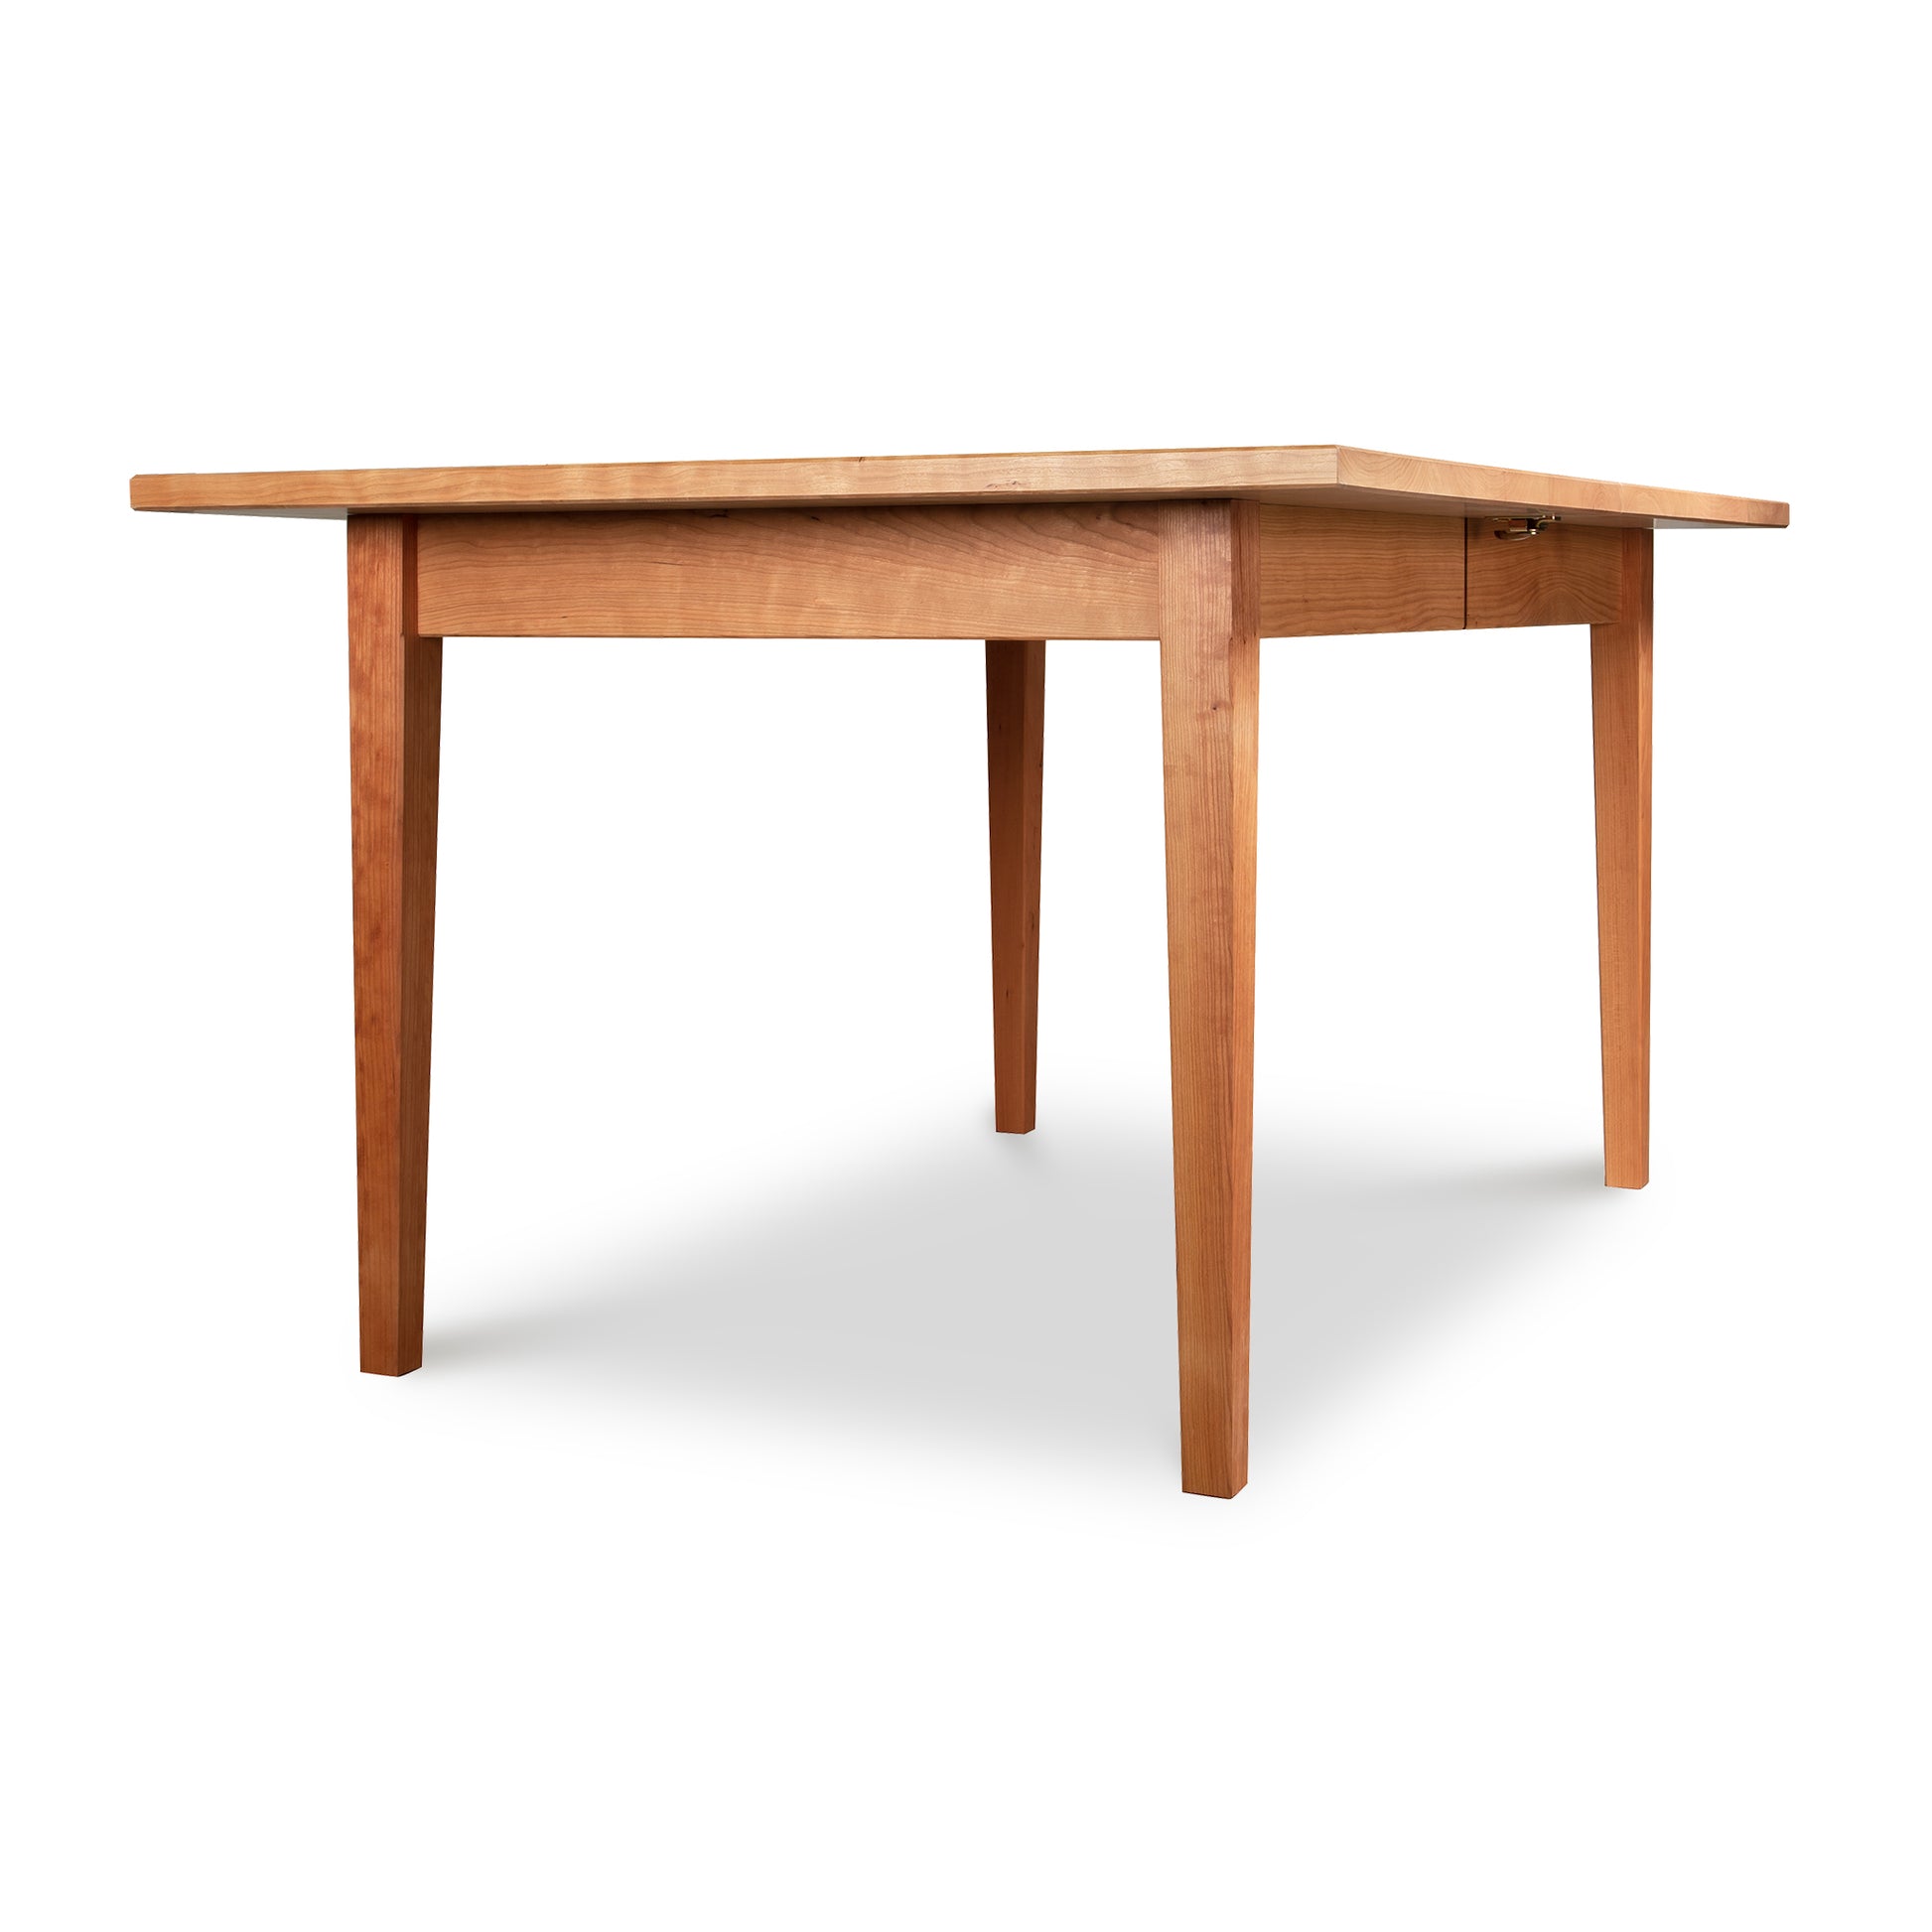 A handcrafted Maple Corner Woodworks Vermont Shaker Rectangular Extension Dining Table made from solid wood, featuring a wooden top and legs.